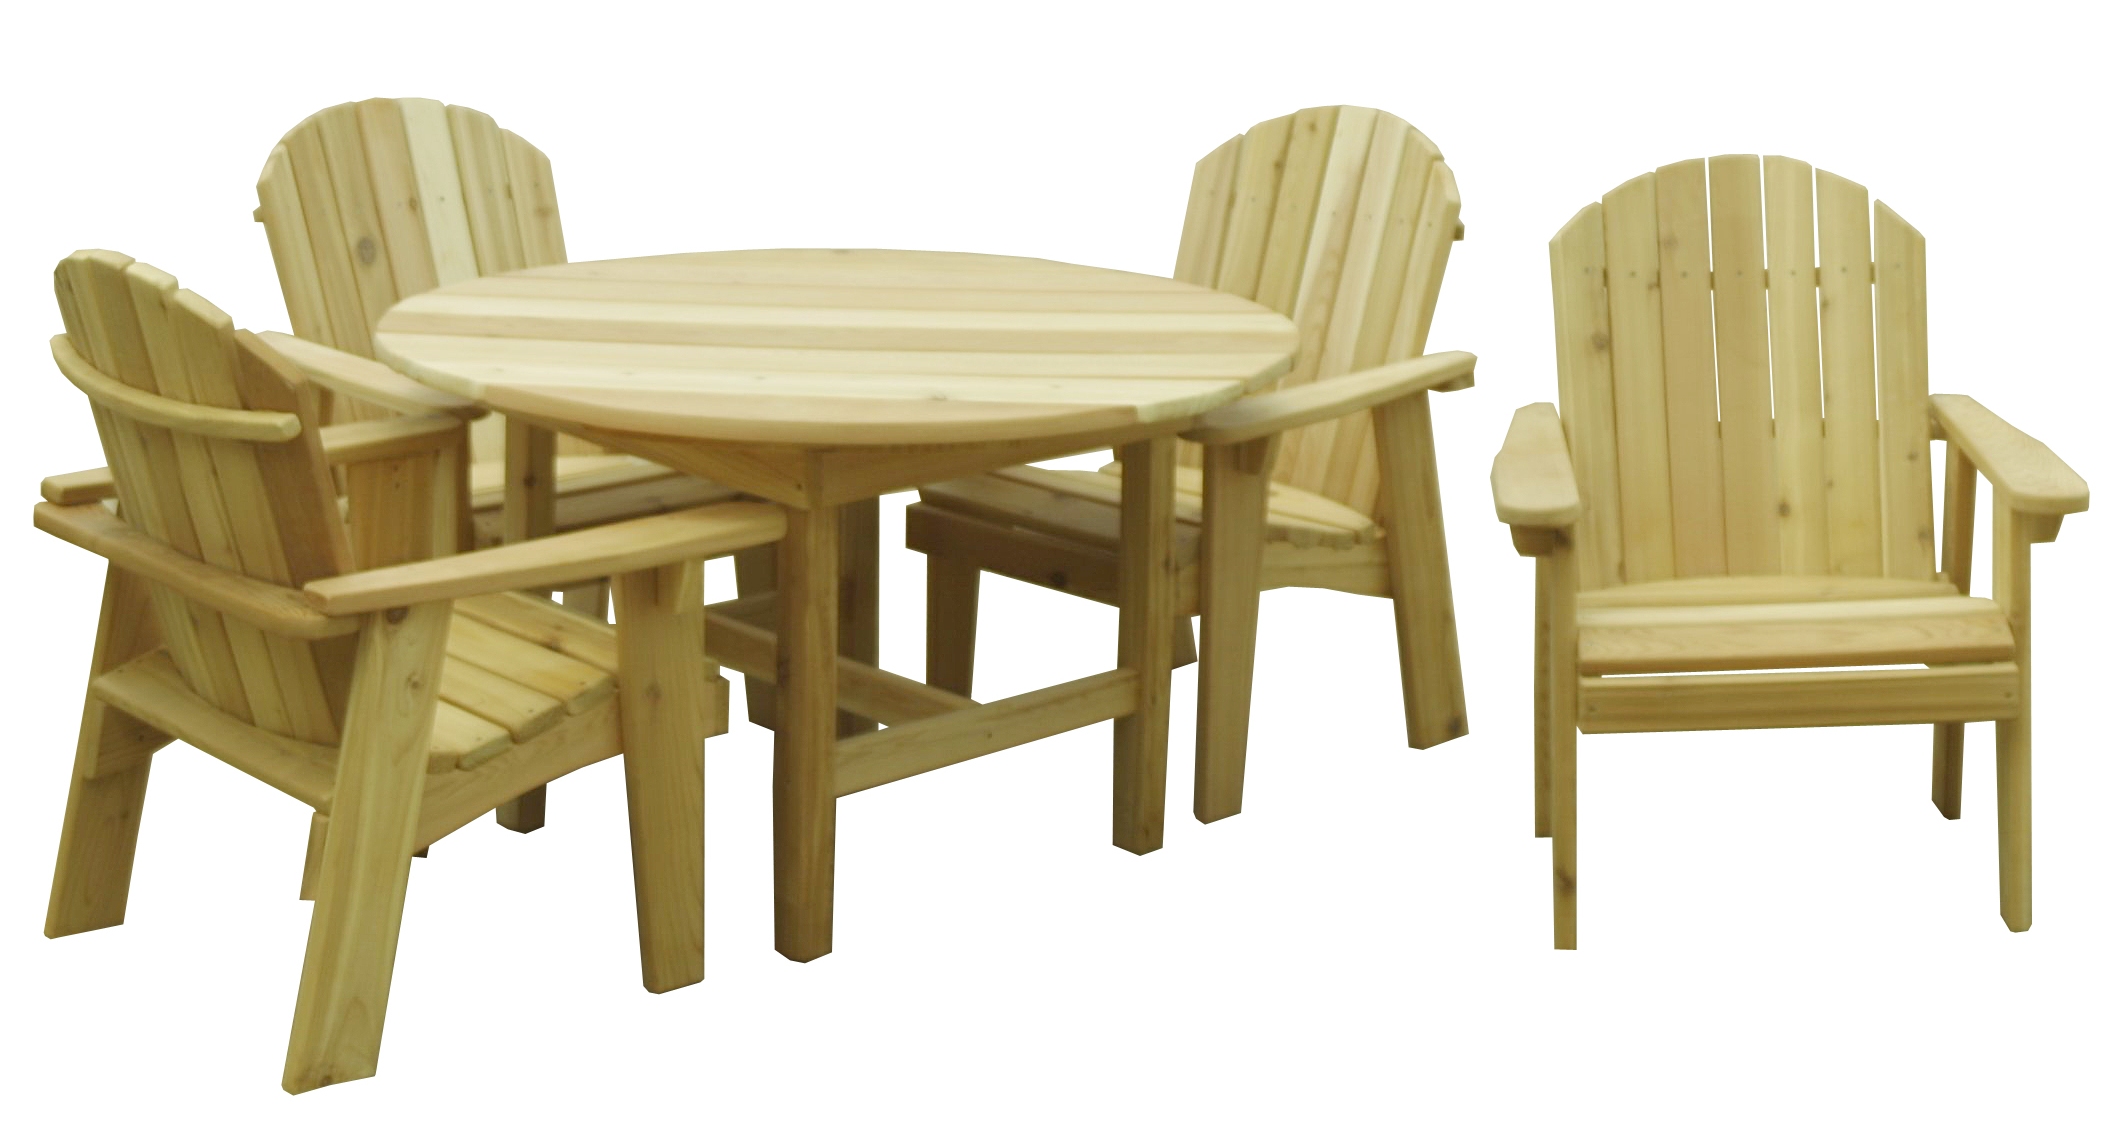 Garden Table & Chairs | All American Woodworking & Awards